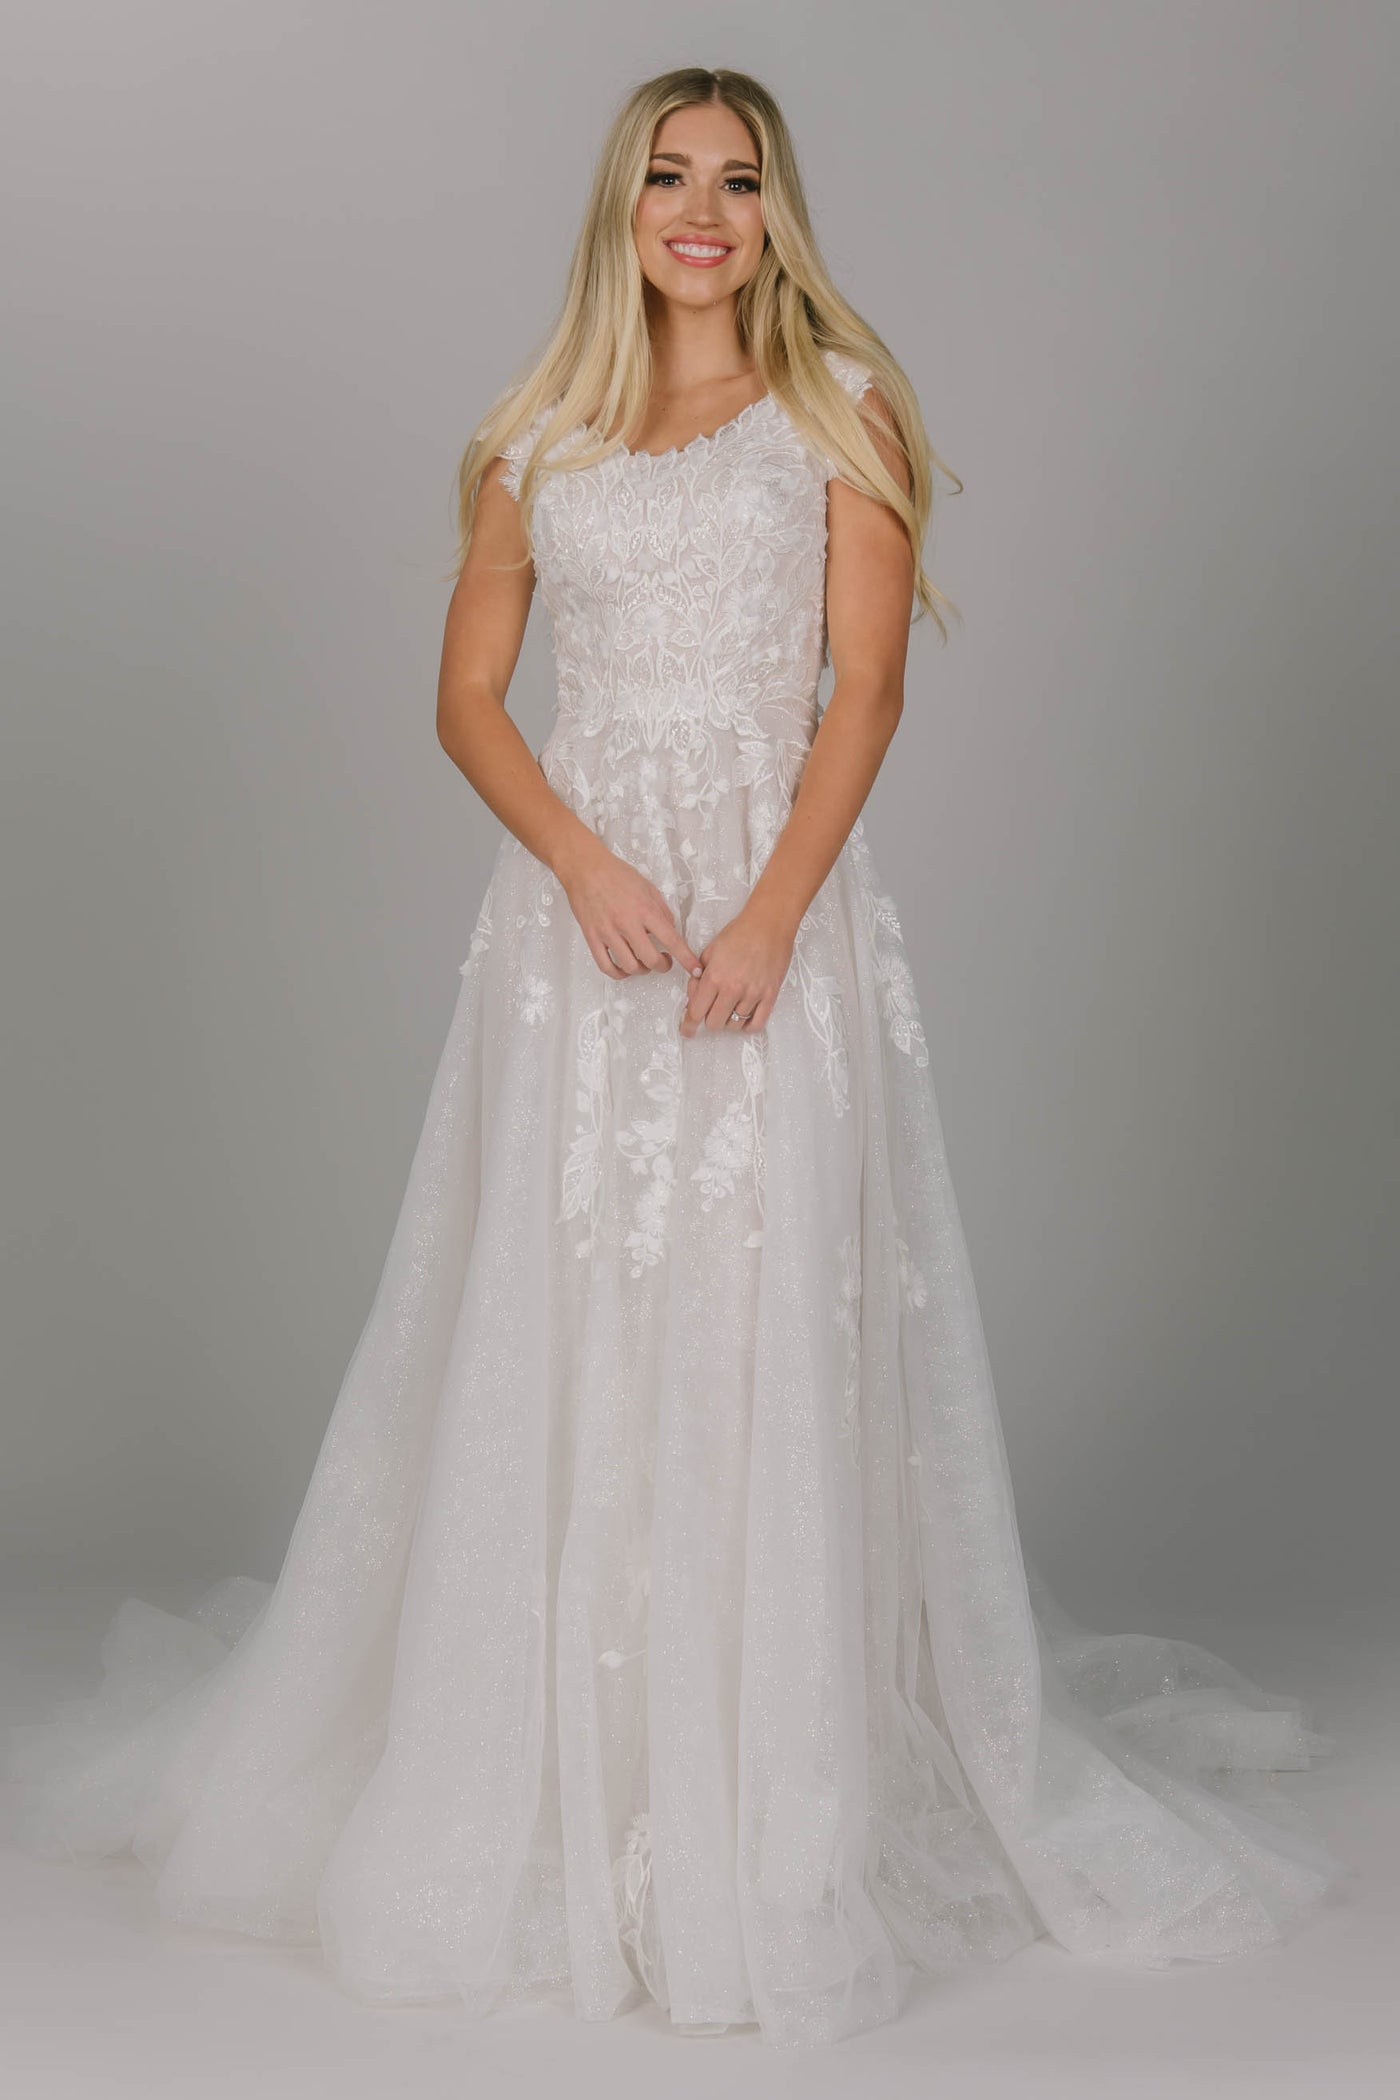 Glitter modest wedding dress. It has a scoop neckline and cap sleeves. The skirt has a soft sparkly glow. It has point leaf lace and a flowy train. 